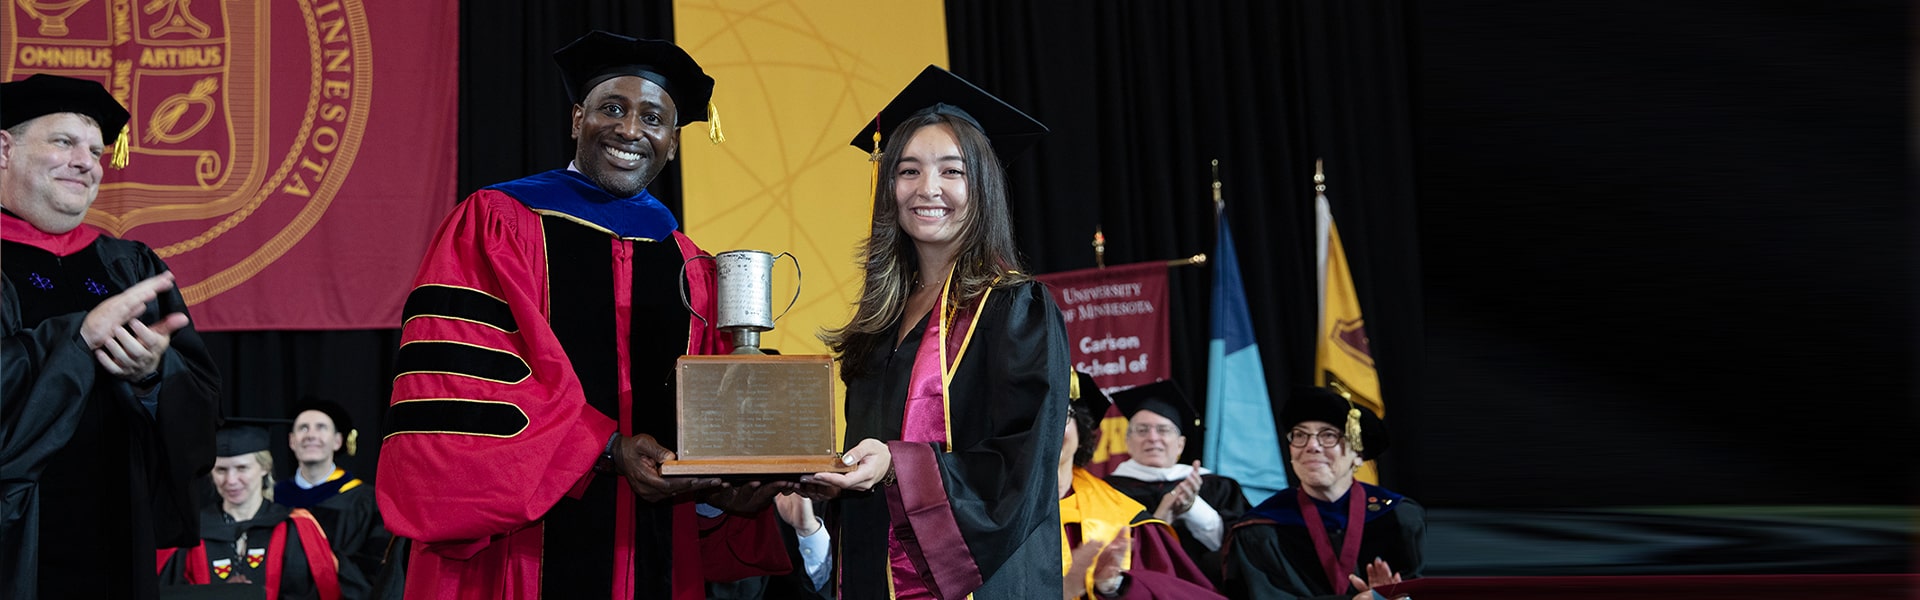 Brynn Nguyen and Assistant Dean Nicholas Wallace holding the Tomato Can Loving Cup award.